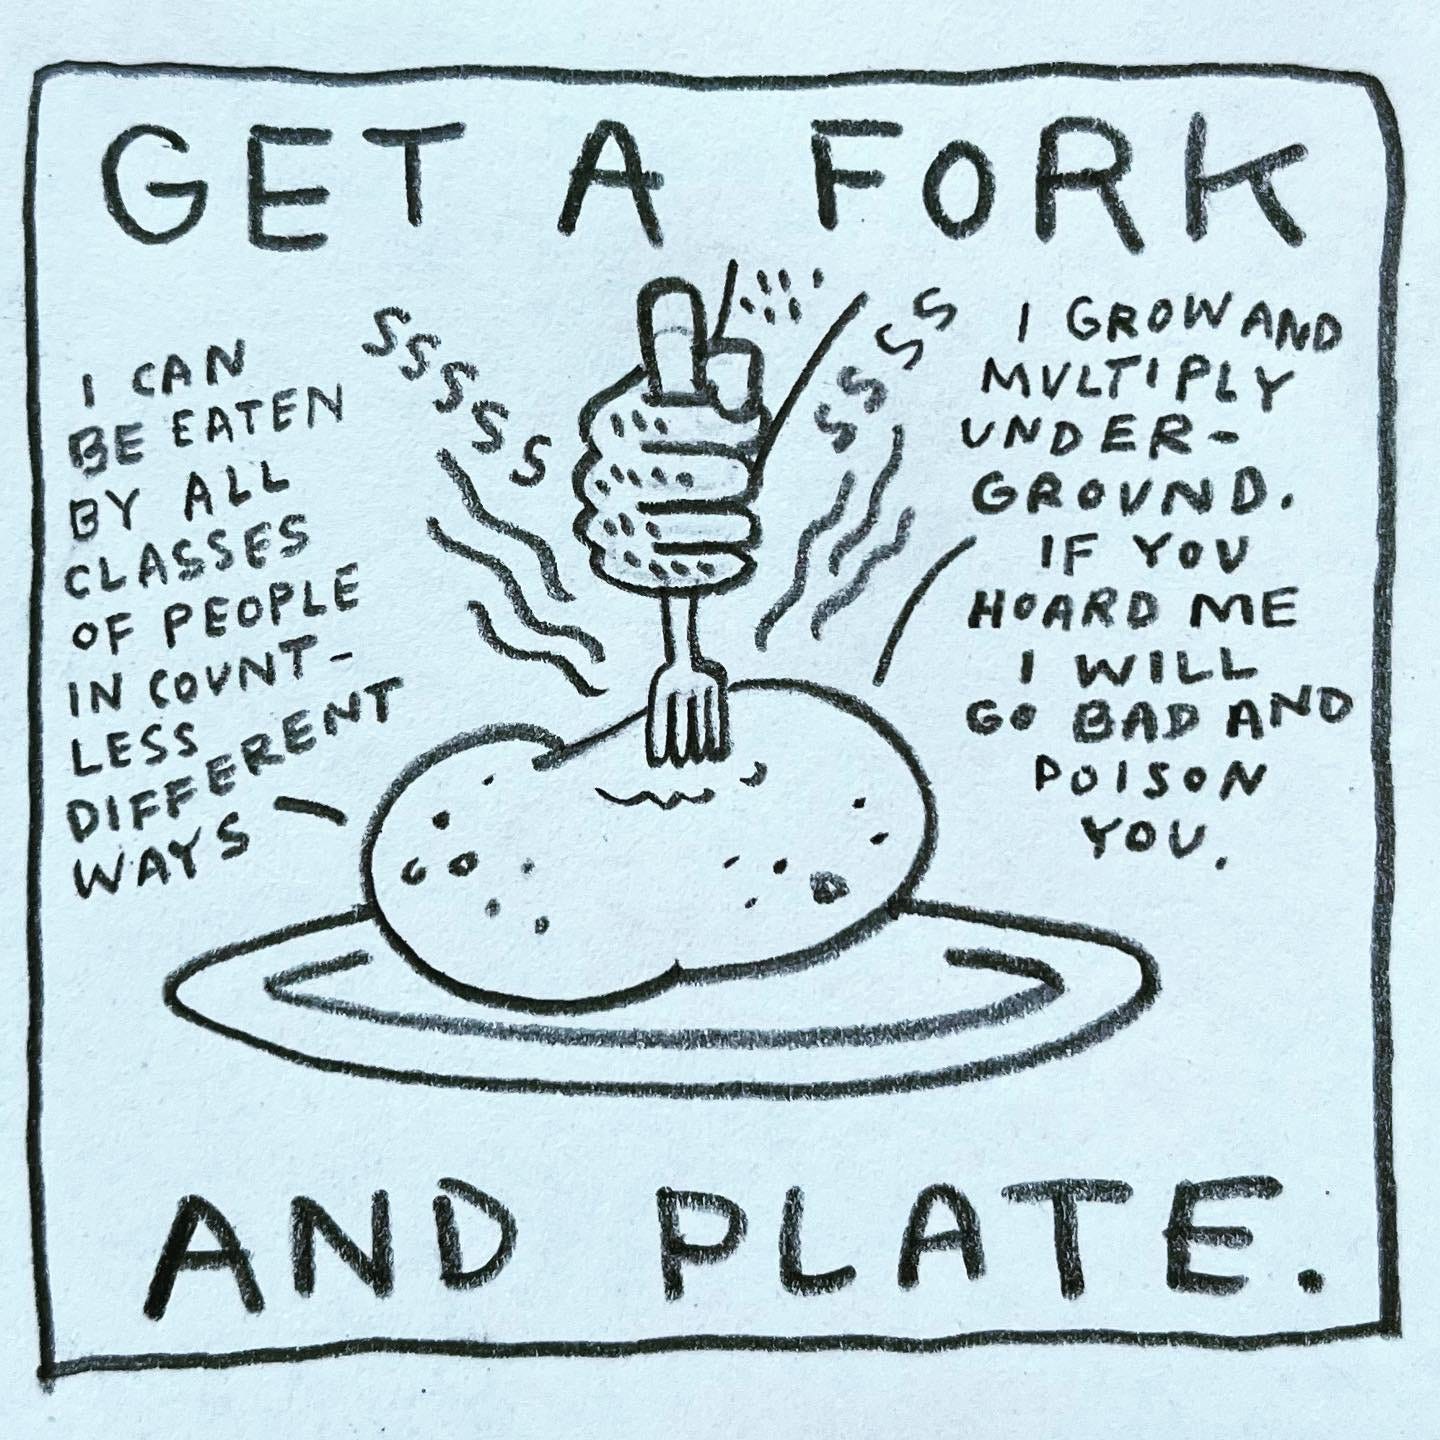 Panel 2: get a fork and plate. Image: a hairy hand stabs a fork into a hot potato on a plate. The potato sizzles, steaming. The potato says "I can be eaten by all classes of people in countless different ways. I grow and multiply underground. If you hoard me I will go bad and poison you"